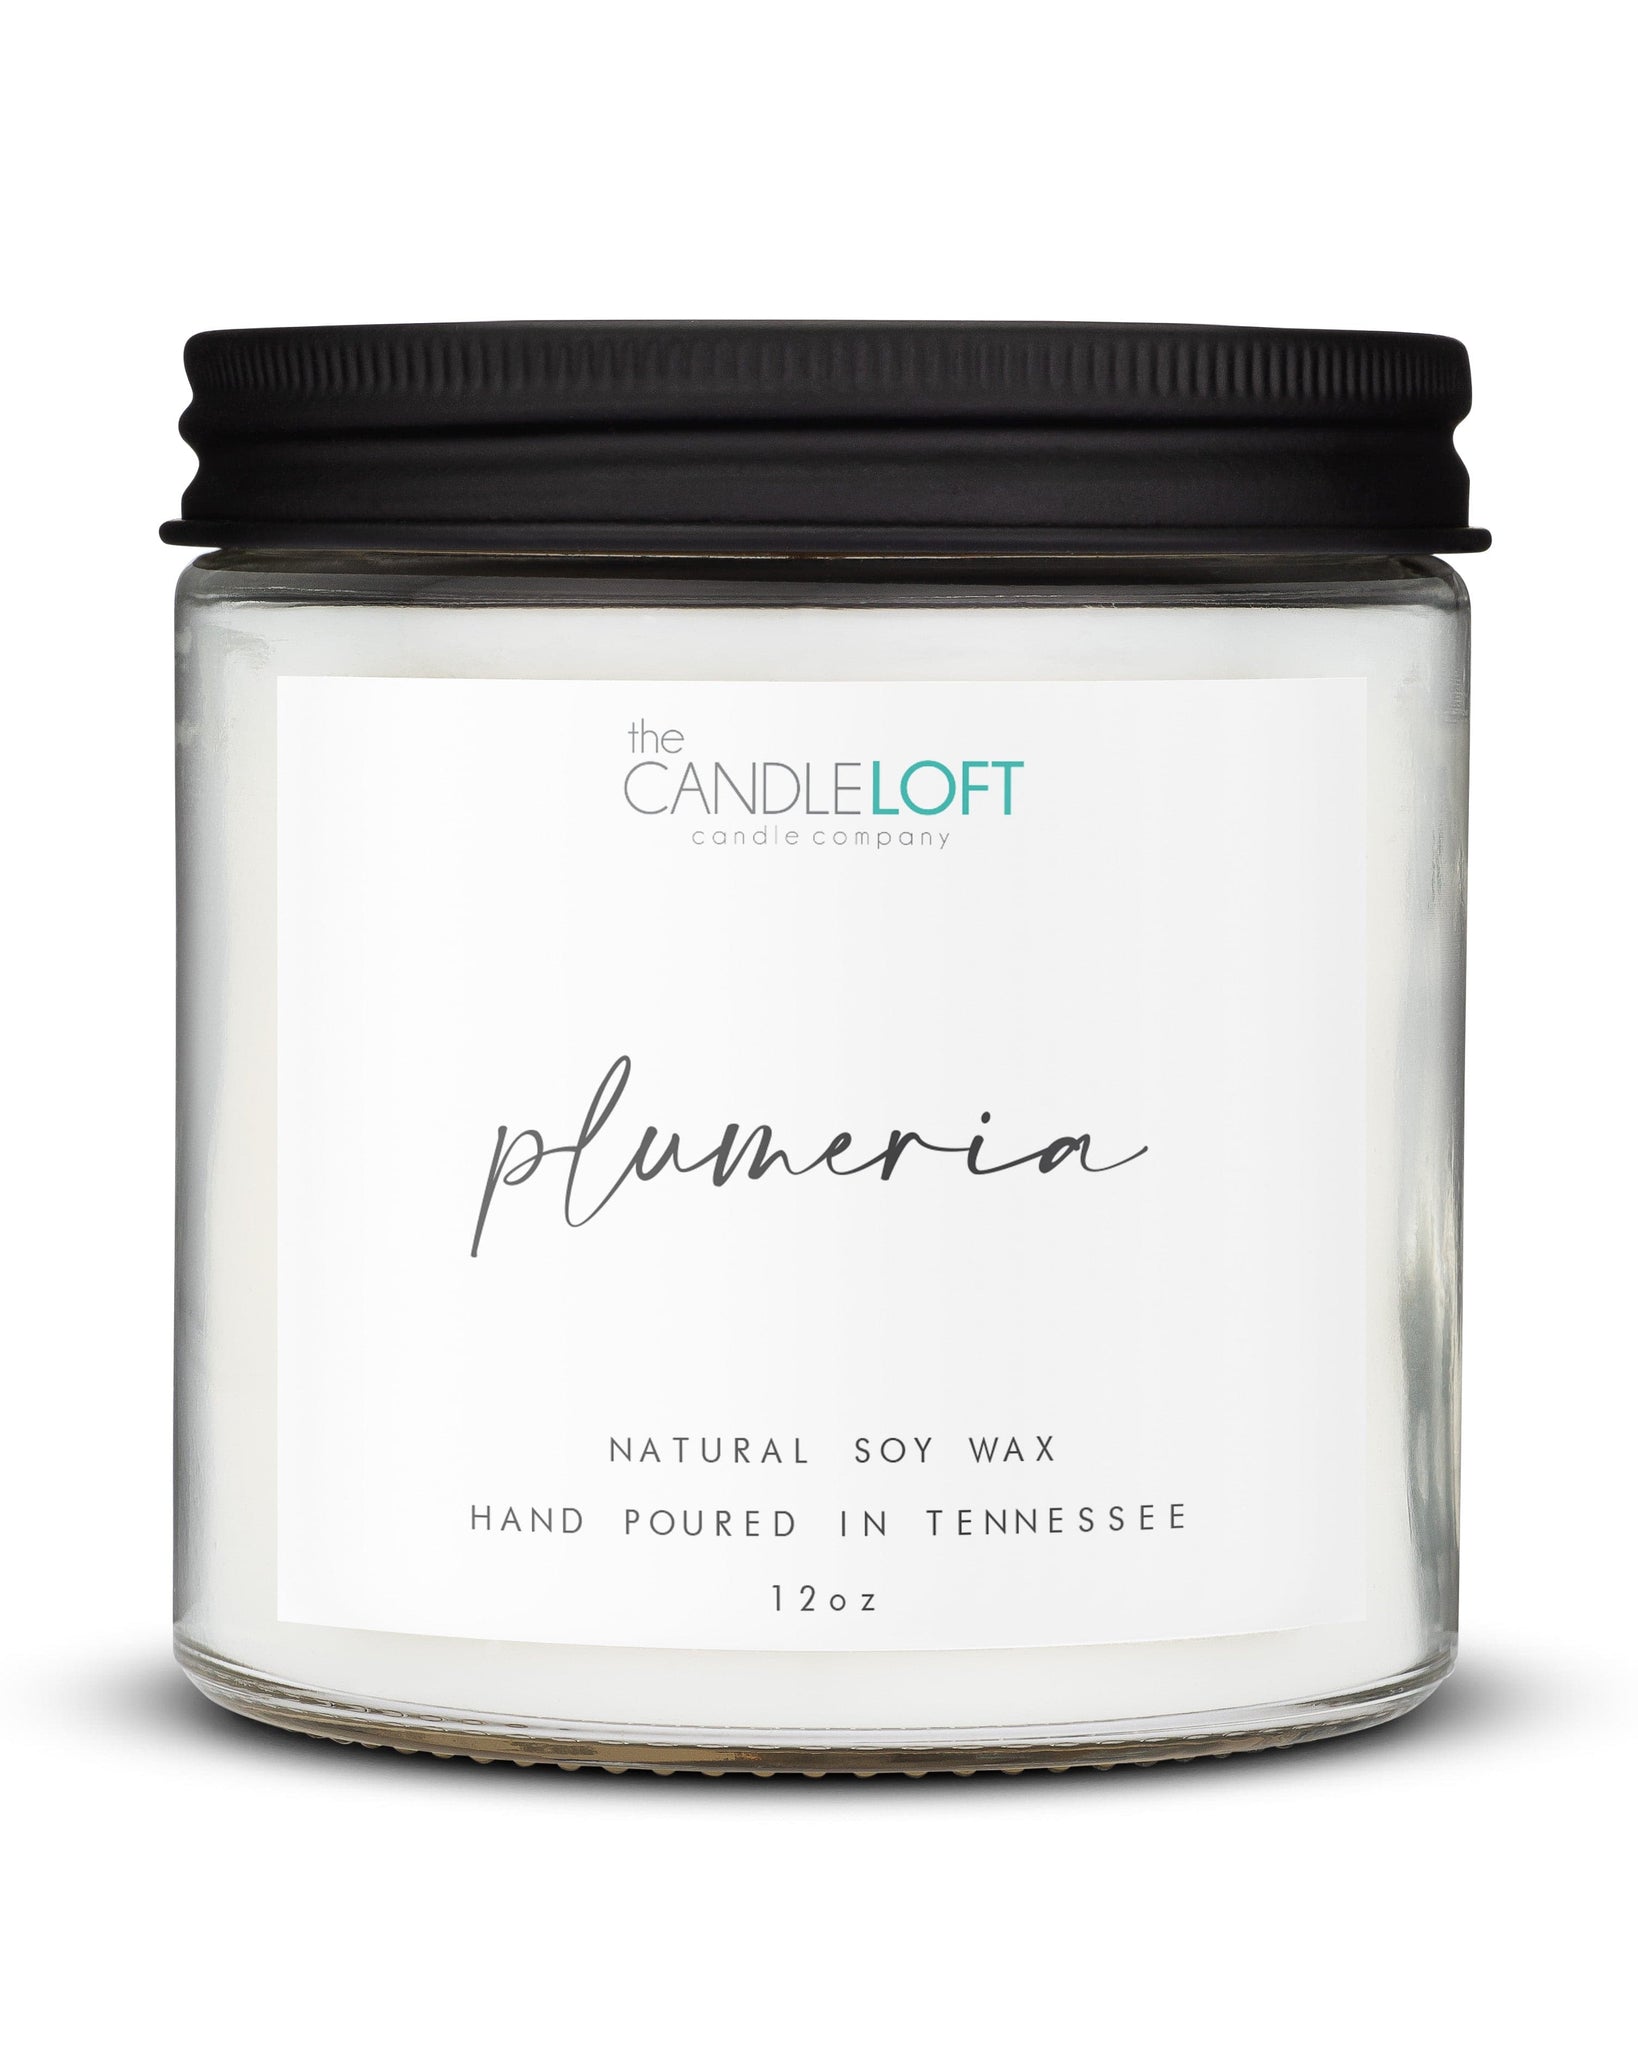 Plumeria Scented Blended Soy Candle | Long Lasting Tropical Floral  Fragrance | Hand Poured in The USA by Just Makes Scents